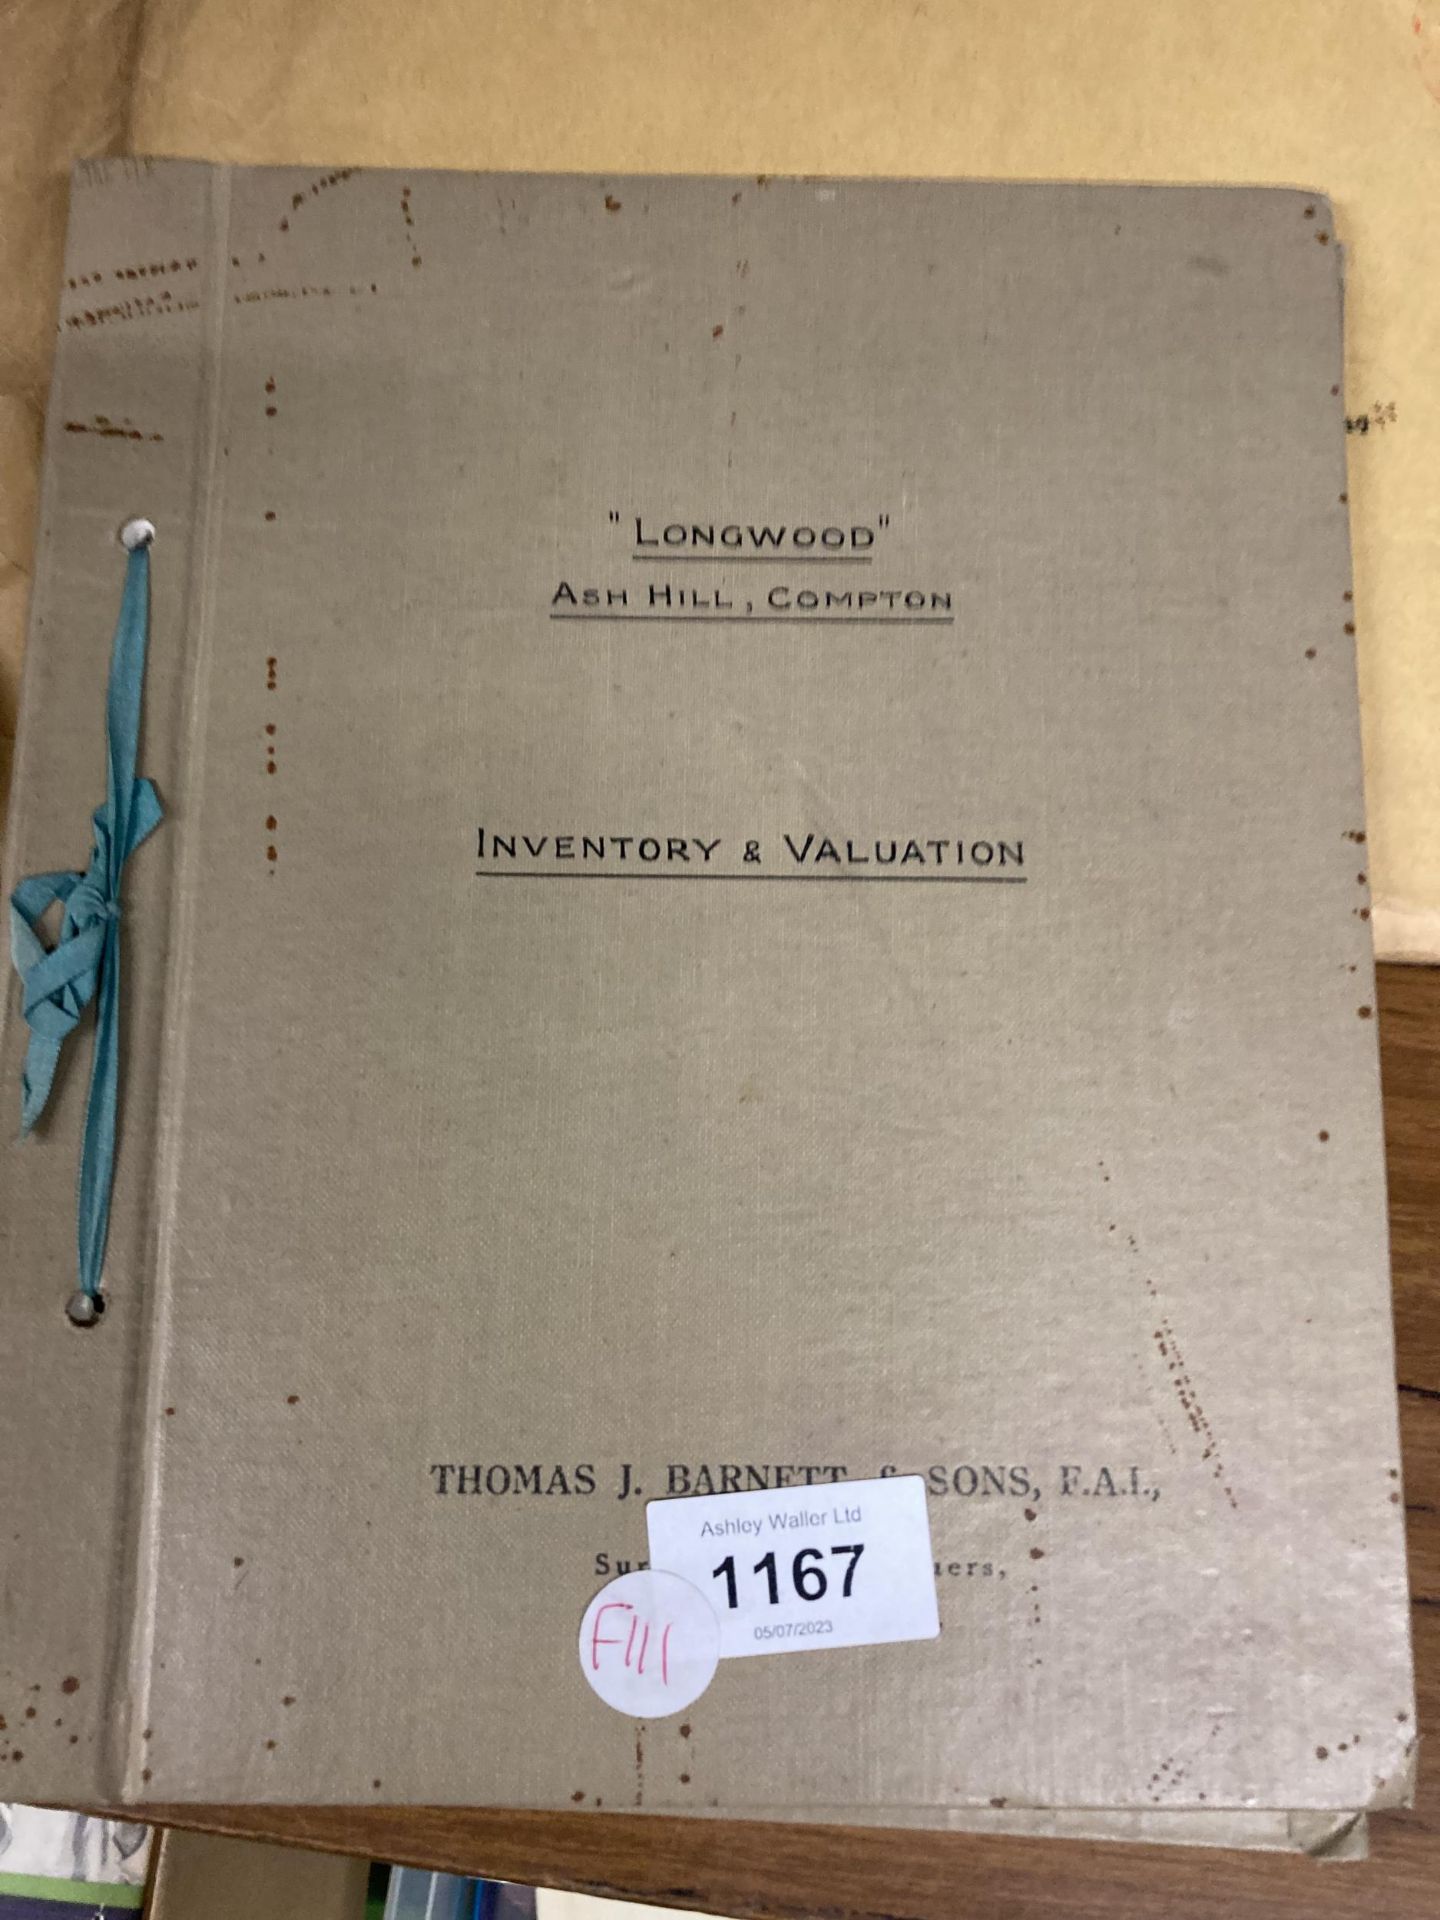 A VINTAGE LONGWOOD ASH HILL INVENTORY AND VALUATION BOOK AND FURTHER ITEMS - Image 2 of 3